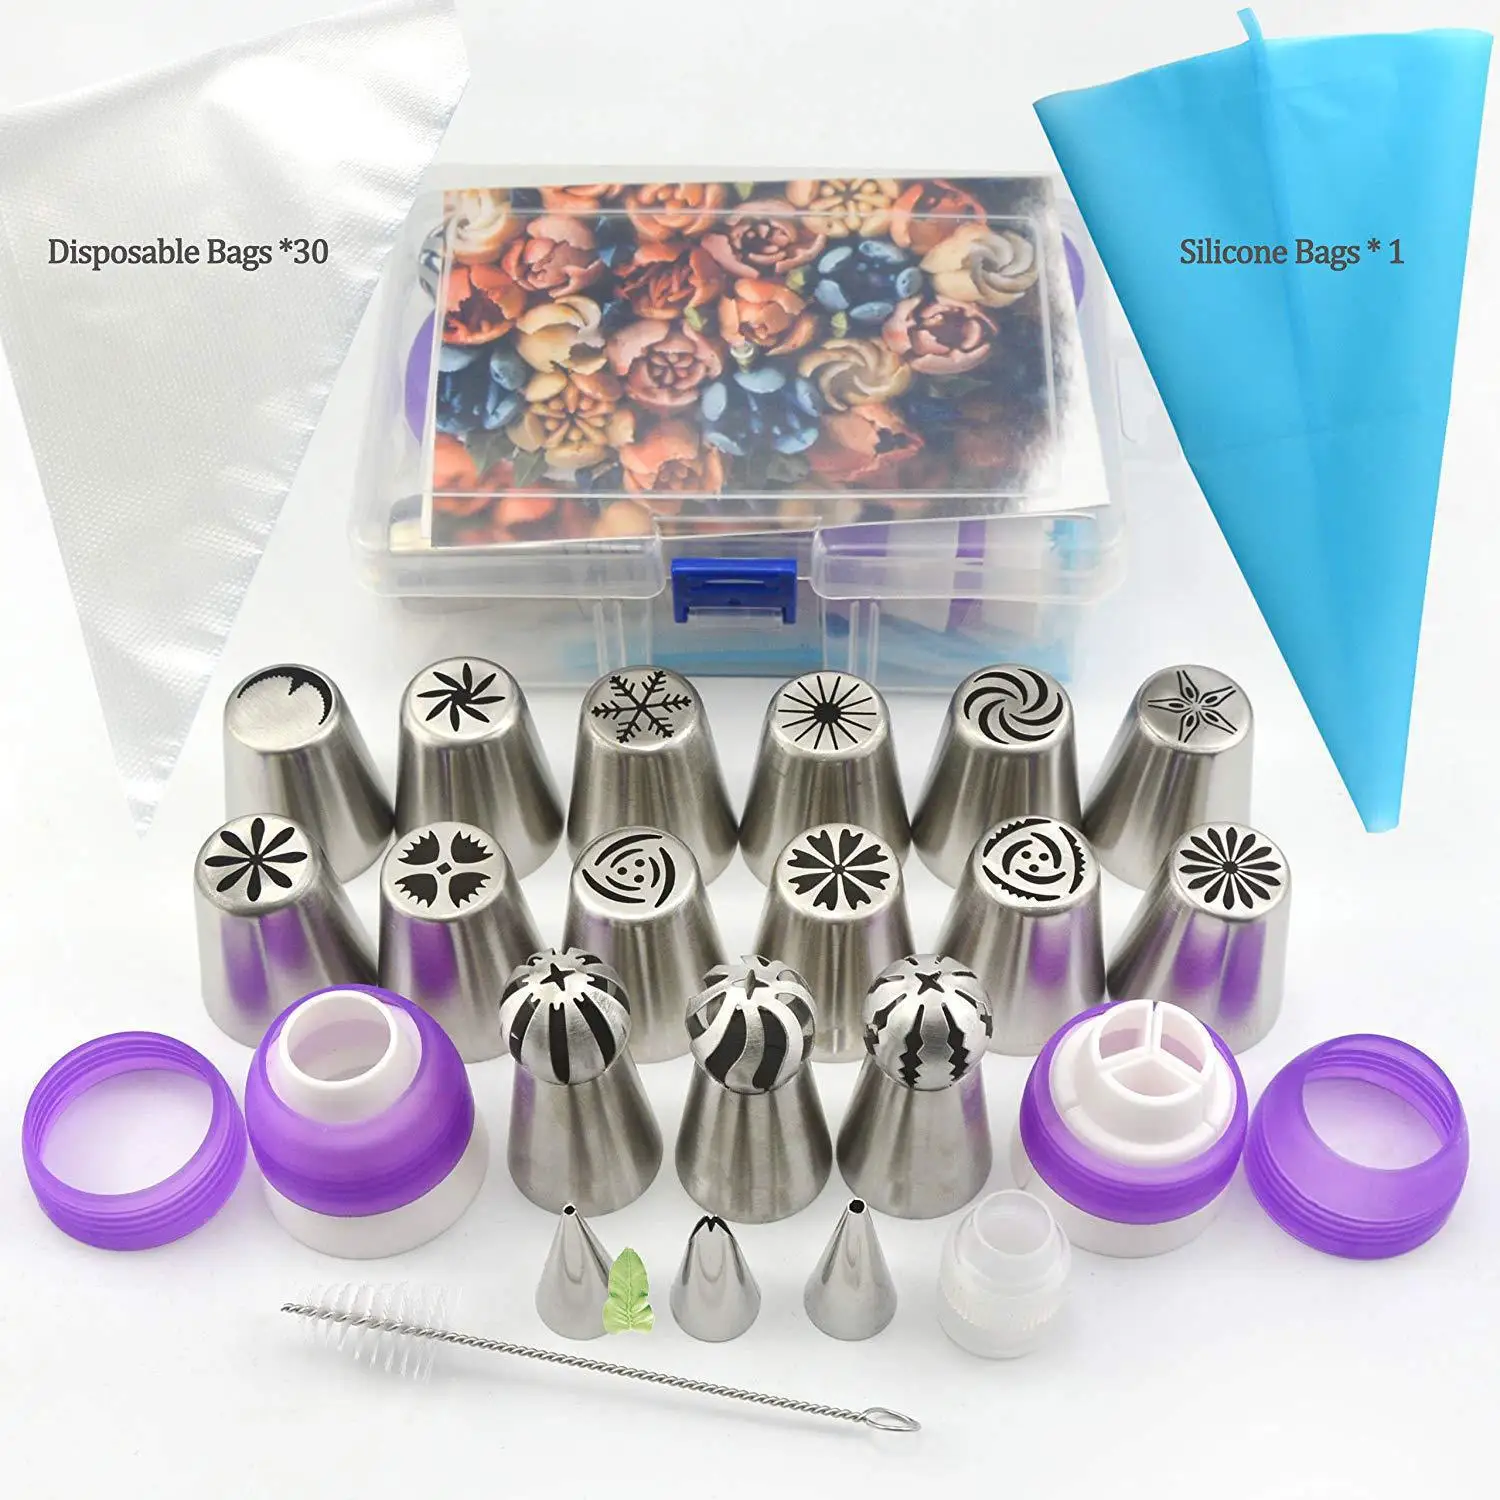 

55Pcs Stainless Steel Piping Tips Bag Pastry Icing Nozzles Cake Decorating Supplies Set, As detail page